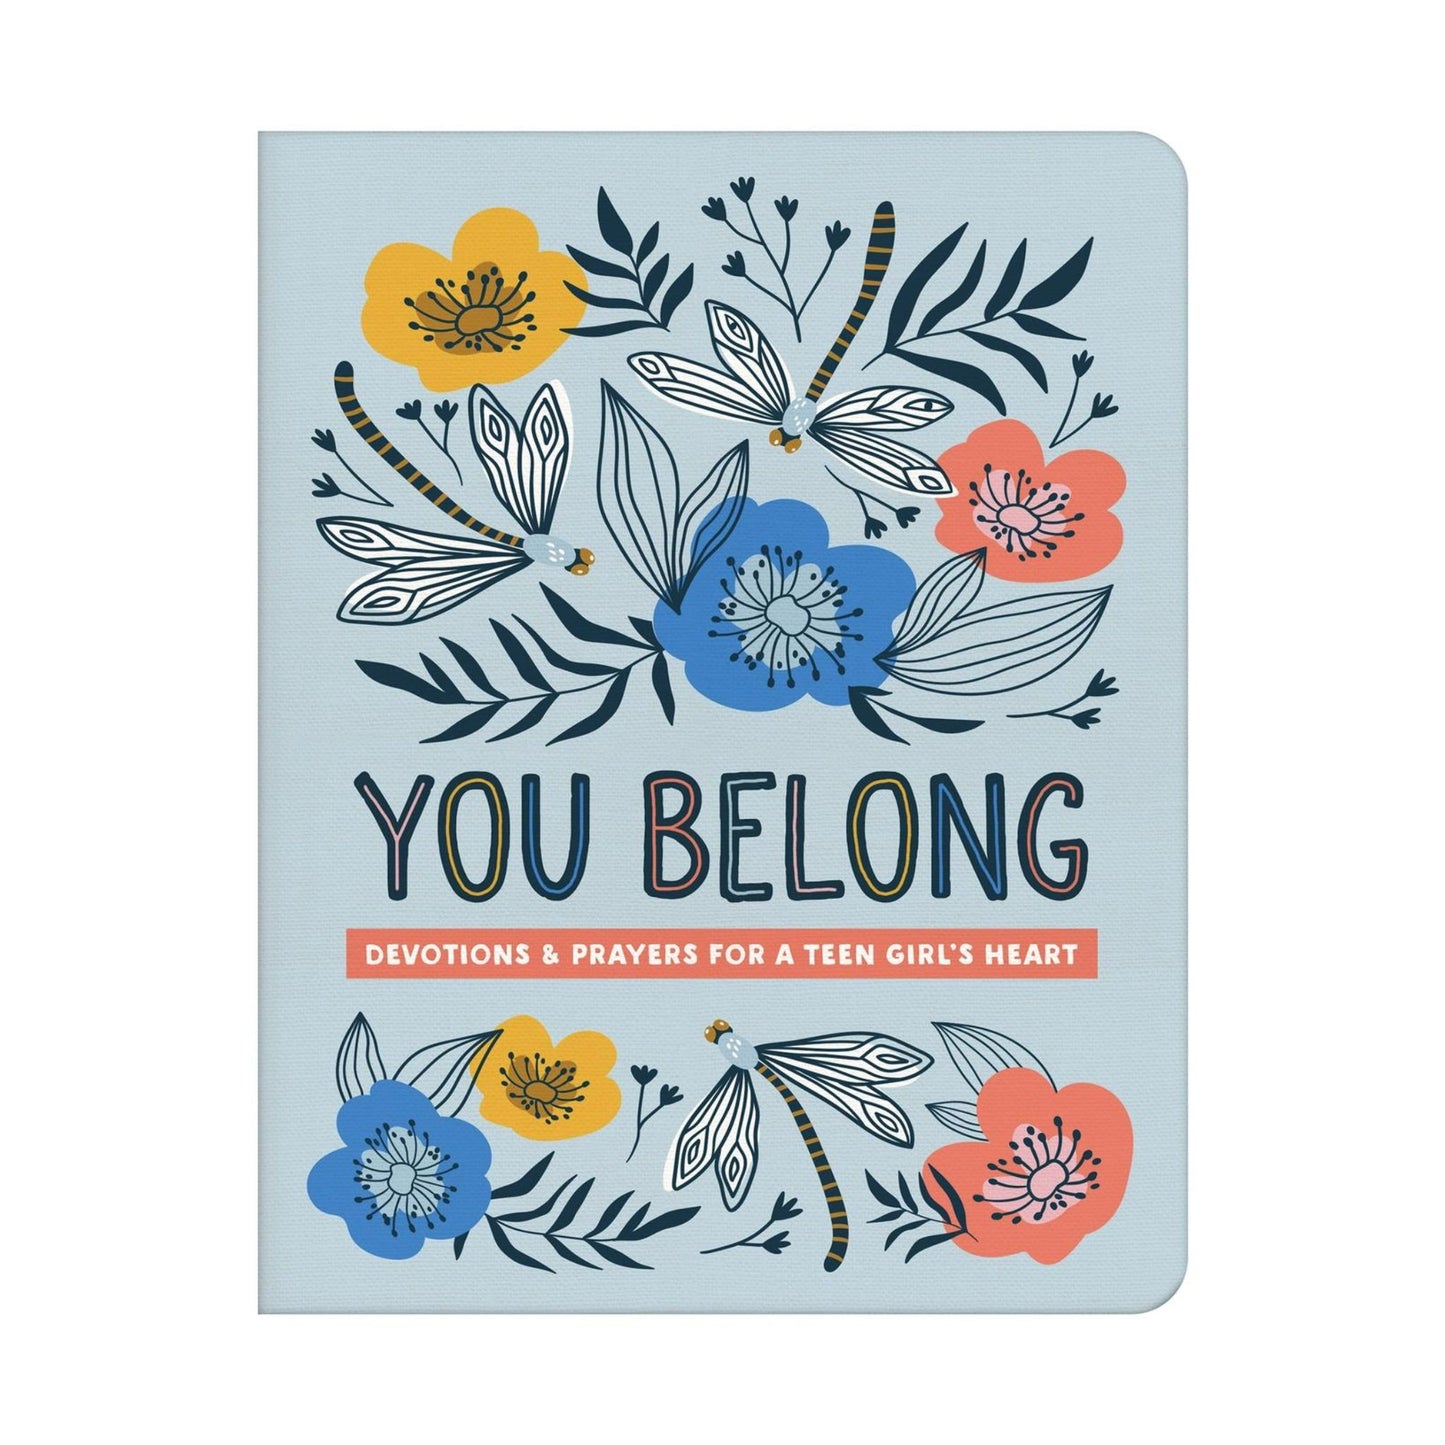 You Belong devotional book, finding reassurance and inspiration.